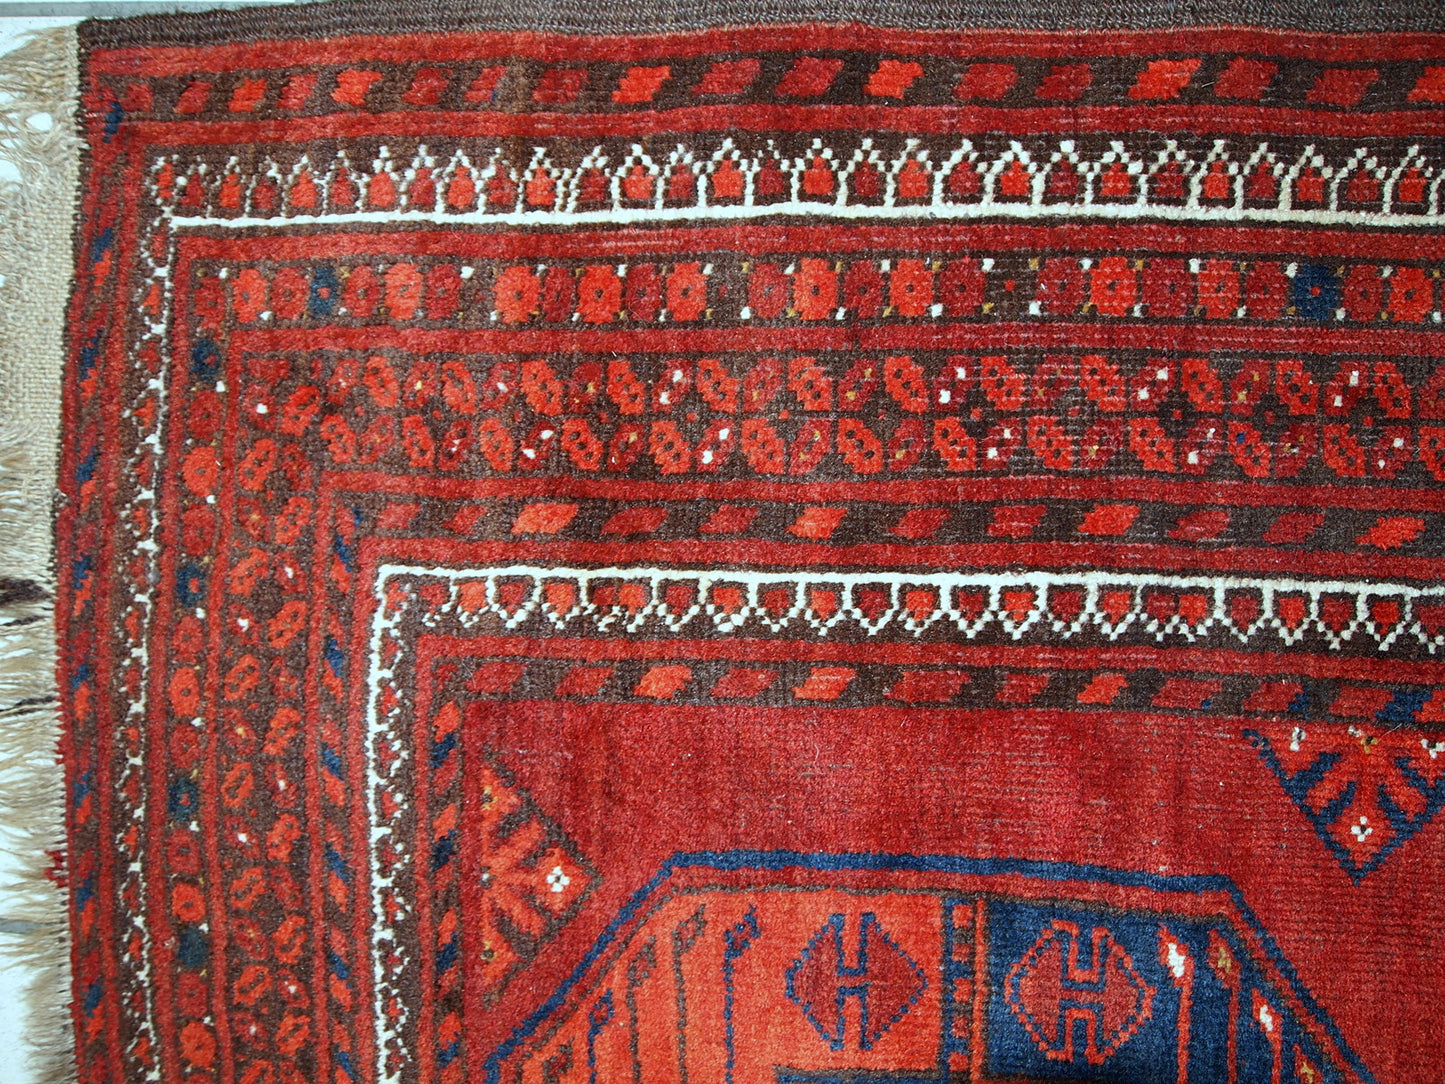 Antique Afghan Ersari rug in original condition, it has some low pile. The rug is from the mid 20th century made in red wool.